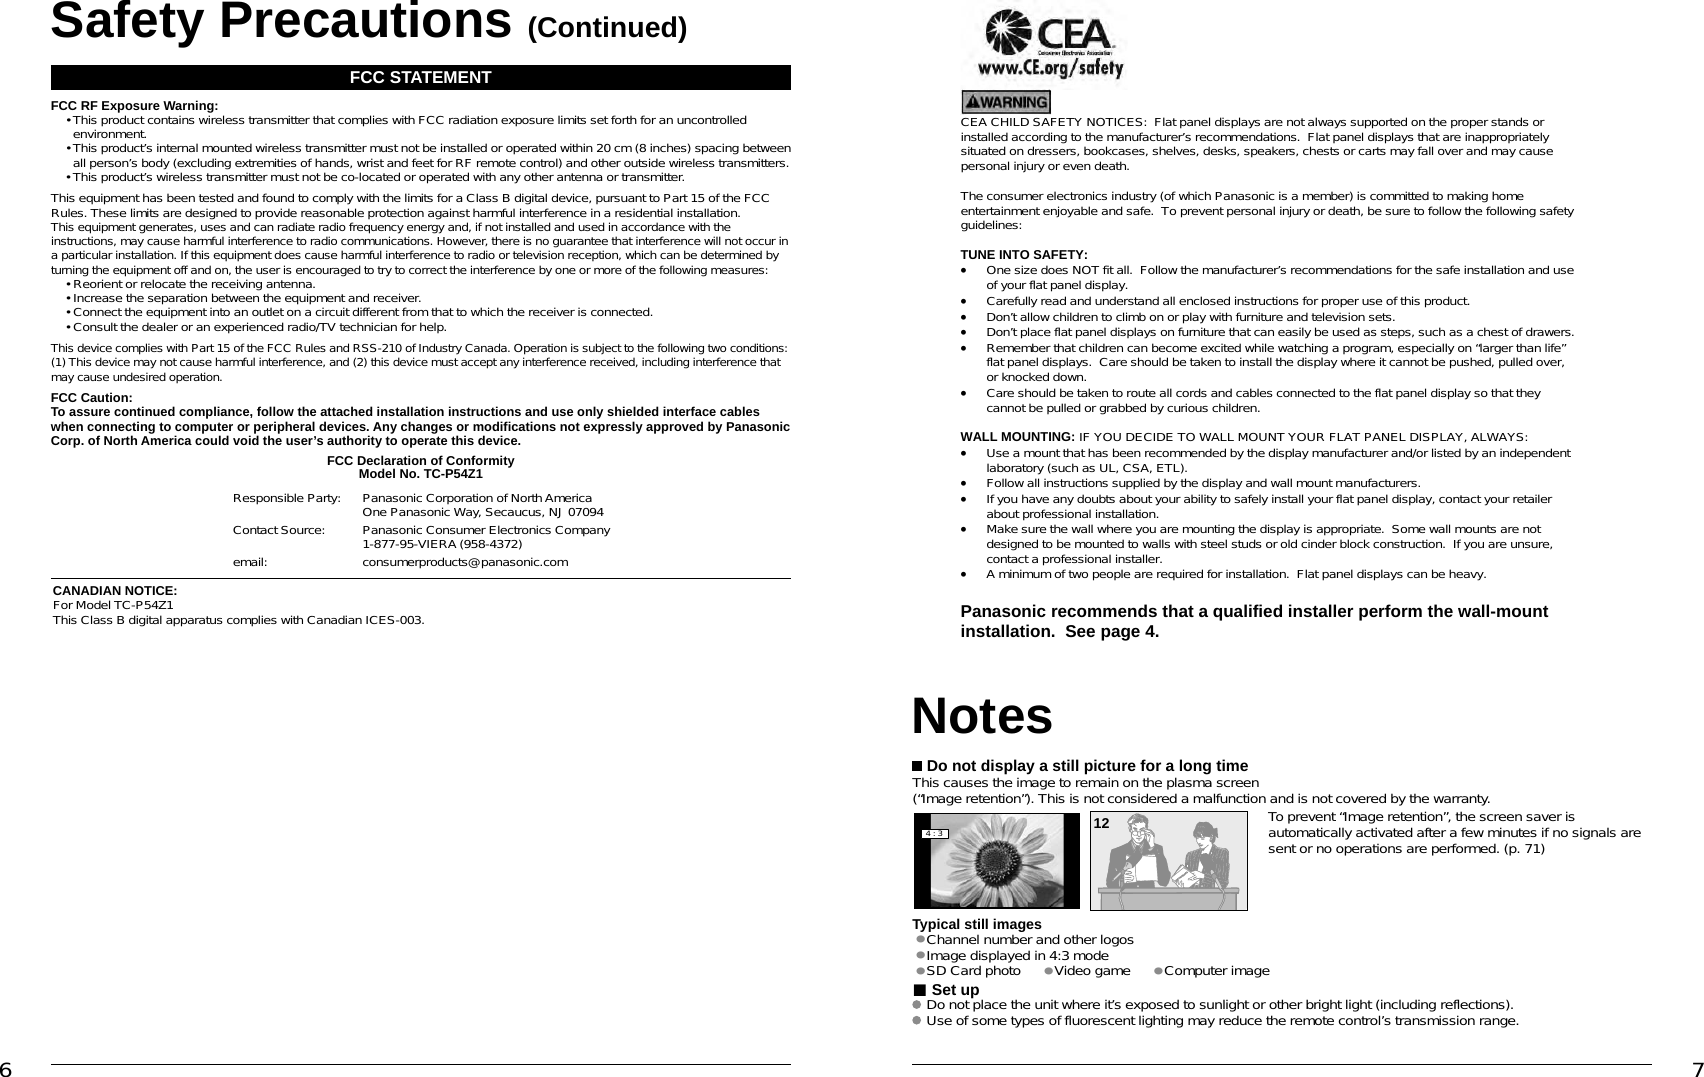 6 7CEA CHILD SAFETY NOTICES:  Flat panel displays are not always supported on the proper stands orinstalled according to the manufacturer’s recommendations.  Flat panel displays that are inappropriatelysituated on dressers, bookcases, shelves, desks, speakers, chests or carts may fall over and may causepersonal injury or even death.The consumer electronics industry (of which Panasonic is a member) is committed to making homeentertainment enjoyable and safe. To prevent personal injury or death, be sure to follow the following safetyguidelines:TUNE INTO SAFETY:•One size does NOT fit all. Follow the manufacturer’s recommendations for the safe installation and useof your flat panel display.•Carefully read and understand all enclosed instructions for proper use of this product.•Don’t allow children to climb on or play with furniture and television sets.•Don’t place flat panel displays on furniture that can easily be used as steps, such as a chest of drawers.•Remember that children can become excited while watching a program, especially on “larger than life”flat panel displays.  Care should be taken to install the display where it cannot be pushed, pulled over,or knocked down.•Care should be taken to route all cords and cables connected to the flat panel display so that theycannot be pulled or grabbed by curious children.WALL MOUNTING: IF YOU DECIDE TO WALL MOUNT YOUR FLAT PANEL DISPLAY, ALWAYS:•Use a mount that has been recommended by the display manufacturer and/or listed by an independentlaboratory (such as UL, CSA, ETL).•Follow all instructions supplied by the display and wall mount manufacturers.•If you have any doubts about your ability to safely install your flat panel display, contact your retailerabout professional installation.•Make sure the wall where you are mounting the display is appropriate.  Some wall mounts are notdesigned to be mounted to walls with steel studs or old cinder block construction.  If you are unsure,contact a professional installer.•A minimum of two people are required for installation.  Flat panel displays can be heavy.Panasonic recommends that a qualified installer perform the wall-mountinstallation.  See page 4.Safety Precautions (Continued) Do not display a still picture for a long timeThis causes the image to remain on the plasma screen(“Image retention”). This is not considered a malfunction and is not covered by the warranty.4 : 312 To prevent “Image retention”, the screen saver is automatically activated after a few minutes if no signals are sent or no operations are performed. (p. 71)Typical still images• Channel number and other logos• Image displayed in 4:3 mode• SD Card photo • Video game     • Computer image Set up Do not place the unit where it’s exposed to sunlight or other bright light (including reflections). Use of some types of fluorescent lighting may reduce the remote control’s transmission range.NotesFCC STATEMENTFCC RF Exposure Warning: •  This product contains wireless transmitter that complies with FCC radiation exposure limits set forth for an uncontrolled environment. •  This product’s internal mounted wireless transmitter must not be installed or operated within 20 cm (8 inches) spacing between all person’s body (excluding extremities of hands, wrist and feet for RF remote control) and other outside wireless transmitters.  • This product’s wireless transmitter must not be co-located or operated with any other antenna or transmitter.This equipment has been tested and found to comply with the limits for a Class B digital device, pursuant to Part 15 of the FCC Rules. These limits are designed to provide reasonable protection against harmful interference in a residential installation. This equipment generates, uses and can radiate radio frequency energy and, if not installed and used in accordance with the instructions, may cause harmful interference to radio communications. However, there is no guarantee that interference will not occur in a particular installation. If this equipment does cause harmful interference to radio or television reception, which can be determined by turning the equipment off and on, the user is encouraged to try to correct the interference by one or more of the following measures:  • Reorient or relocate the receiving antenna.  • Increase the separation between the equipment and receiver.  • Connect the equipment into an outlet on a circuit different from that to which the receiver is connected.  • Consult the dealer or an experienced radio/TV technician for help.This device complies with Part 15 of the FCC Rules and RSS-210 of Industry Canada. Operation is subject to the following two conditions: (1) This device may not cause harmful interference, and (2) this device must accept any interference received, including interference that may cause undesired operation.FCC Caution:To assure continued compliance, follow the attached installation instructions and use only shielded interface cables when connecting to computer or peripheral devices. Any changes or modifications not expressly approved by Panasonic Corp. of North America could void the user’s authority to operate this device.FCC Declaration of ConformityModel No. TC-P54Z1Responsible Party: Panasonic Corporation of North AmericaOne Panasonic Way, Secaucus, NJ 07094Contact Source: Panasonic Consumer Electronics Company1-877-95-VIERA (958-4372)email: consumerproducts@panasonic.comCANADIAN NOTICE:For Model TC-P54Z1This Class B digital apparatus complies with Canadian ICES-003.